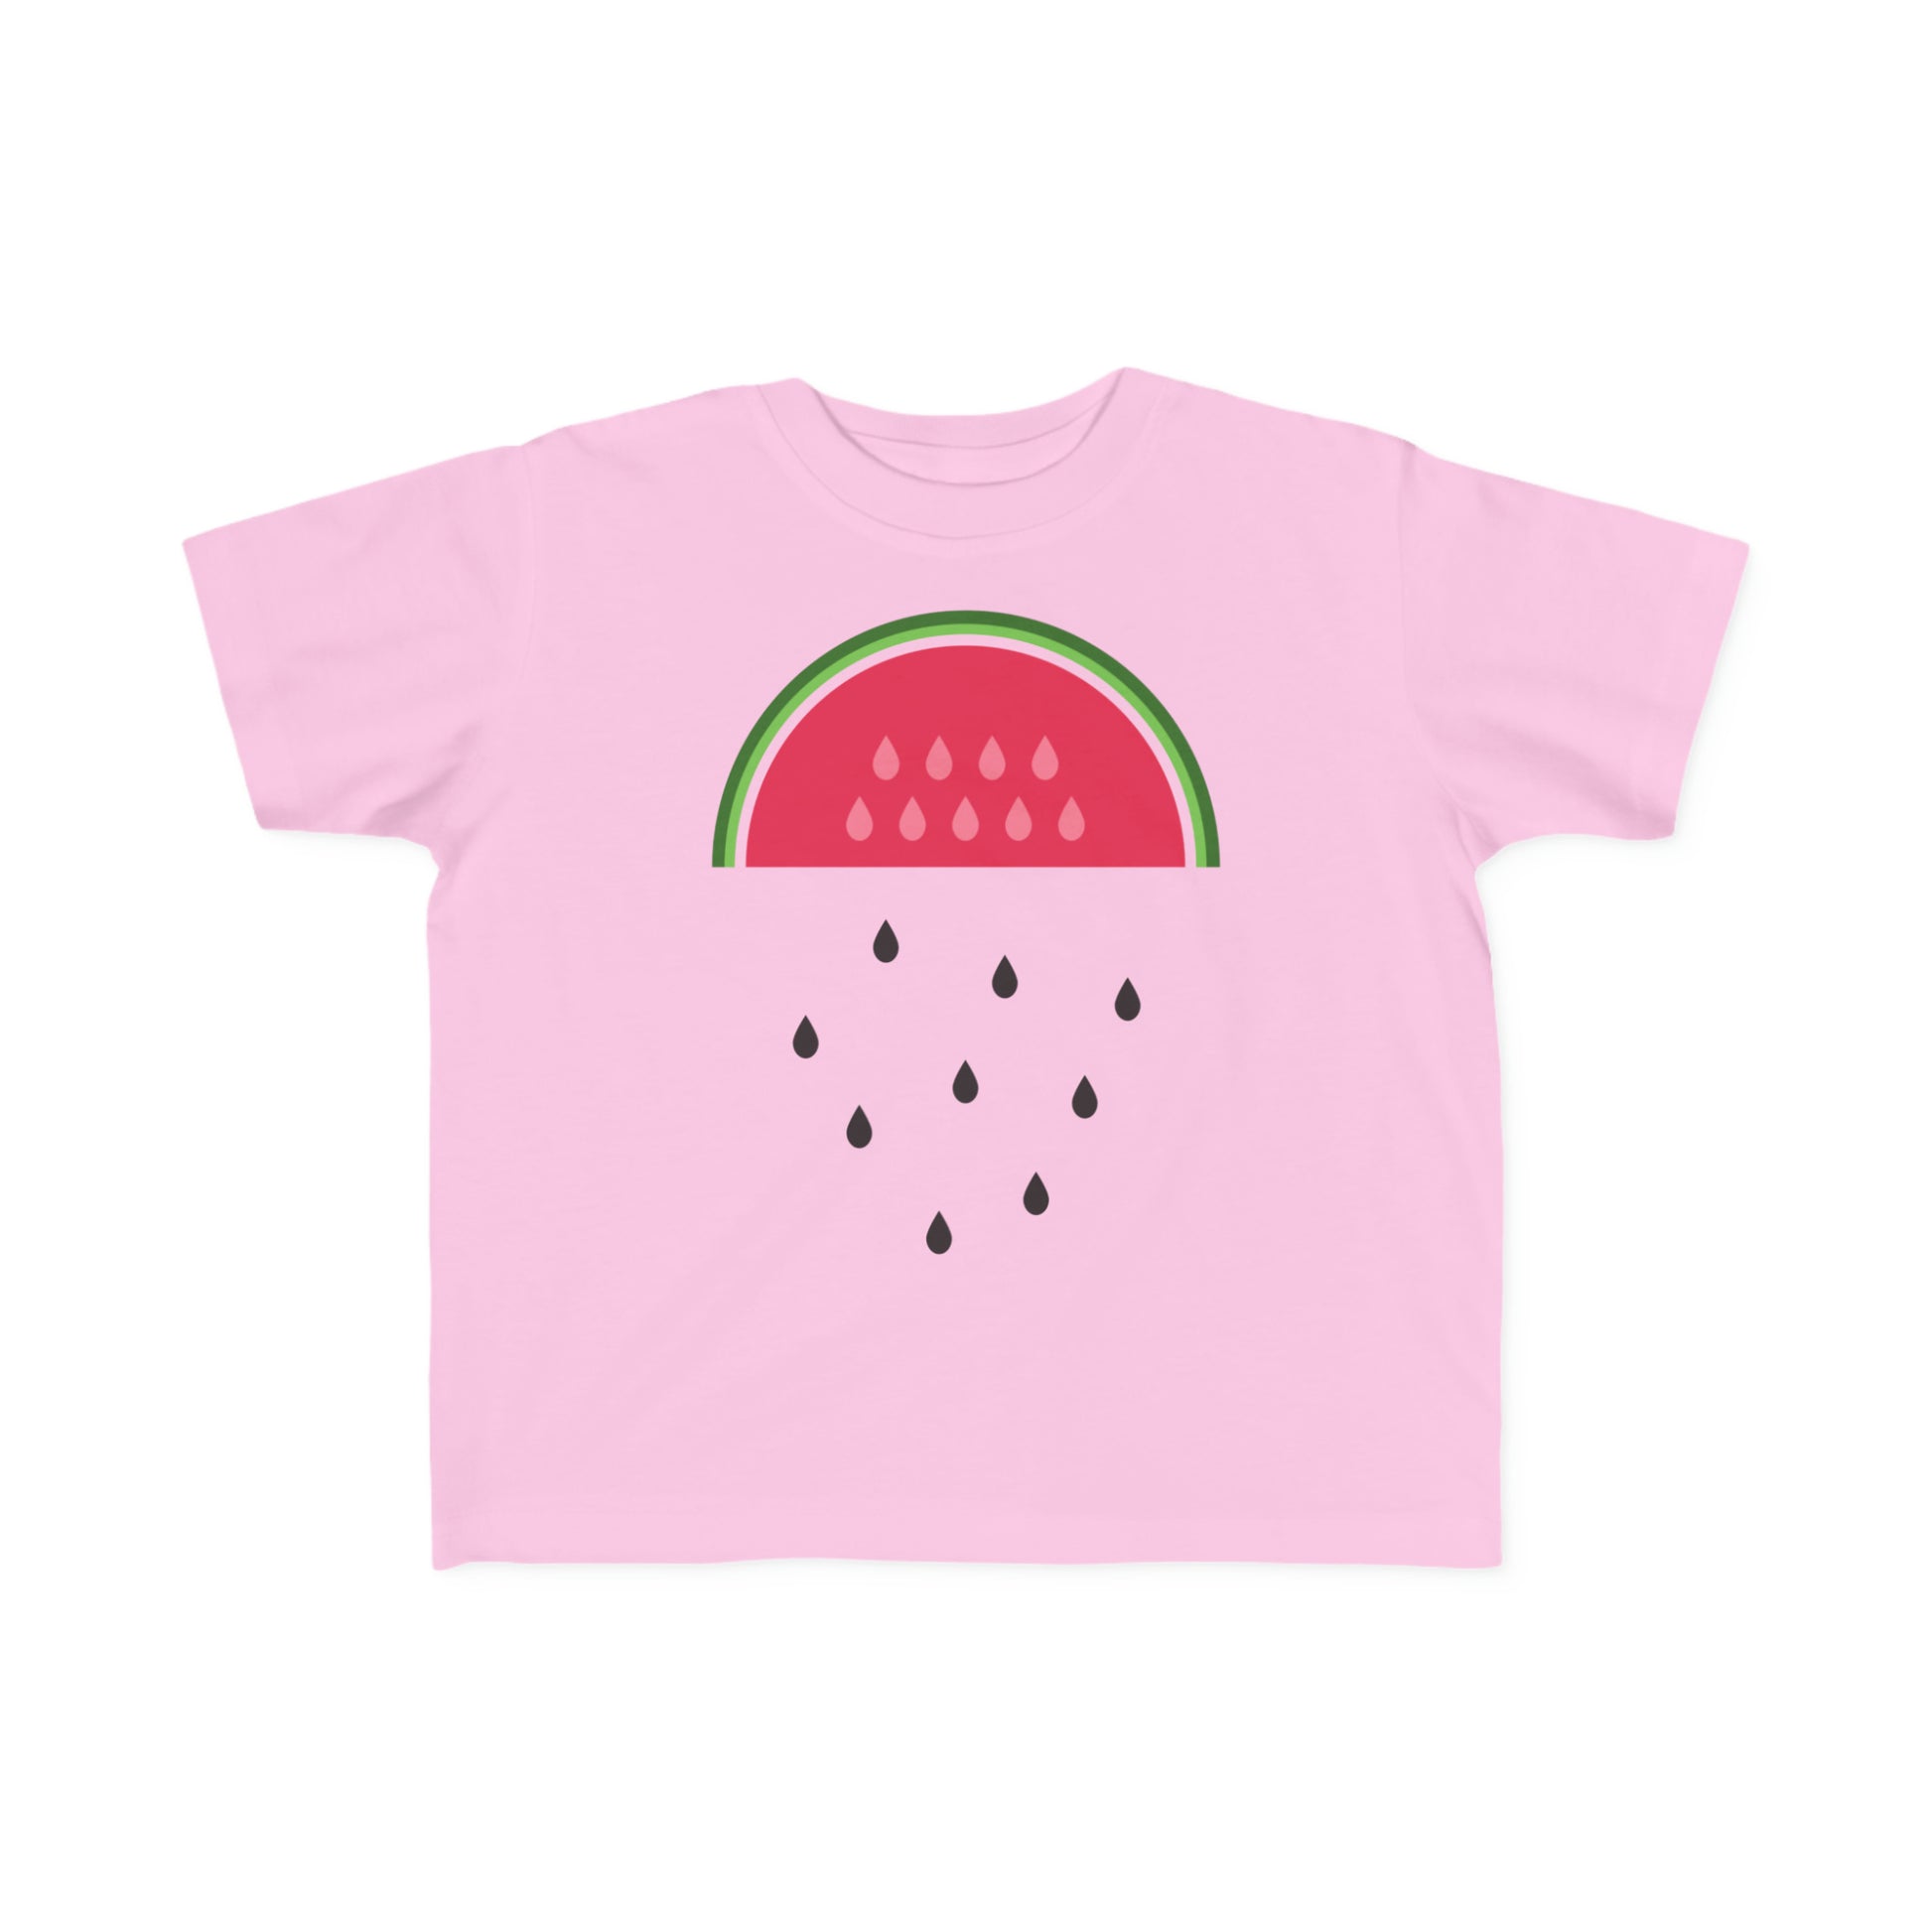 pink kids tshirt with  a cute illustration of a watermelon raining it's pips